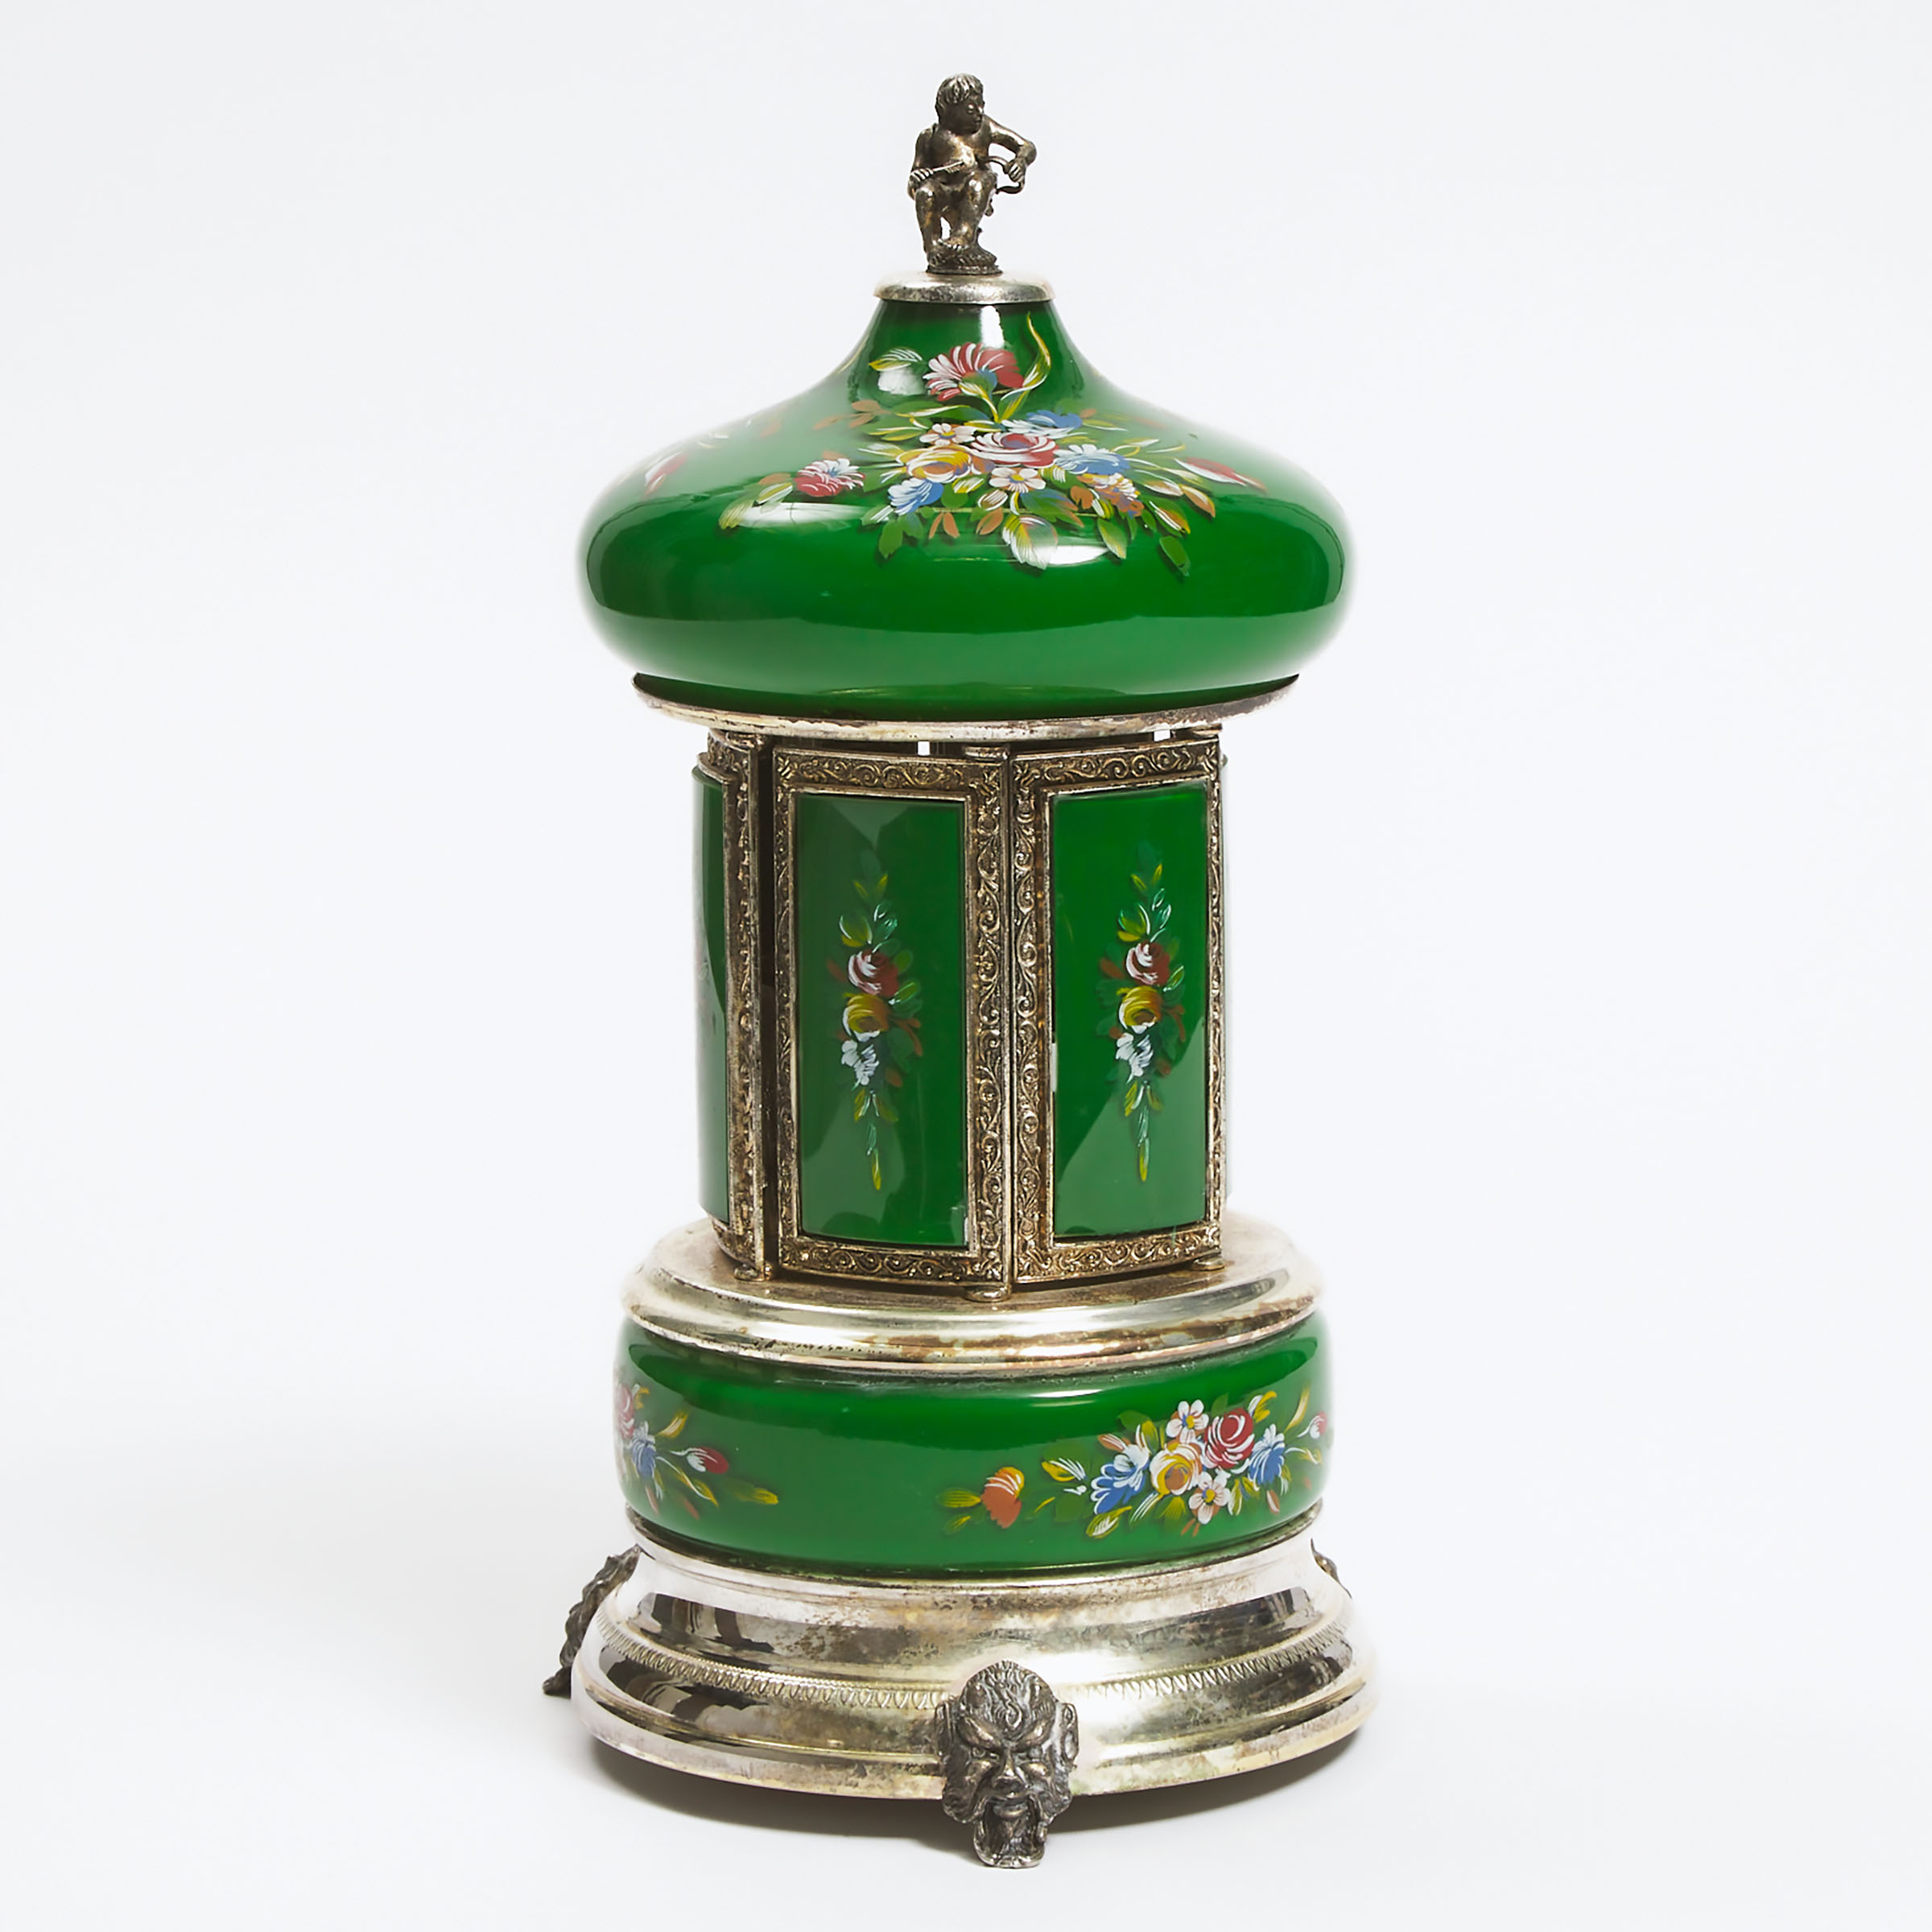 Italian Enamelled Glass and Silvered Metal Automaton Cigarette Caddy, Simo, Florence, mid 20th century